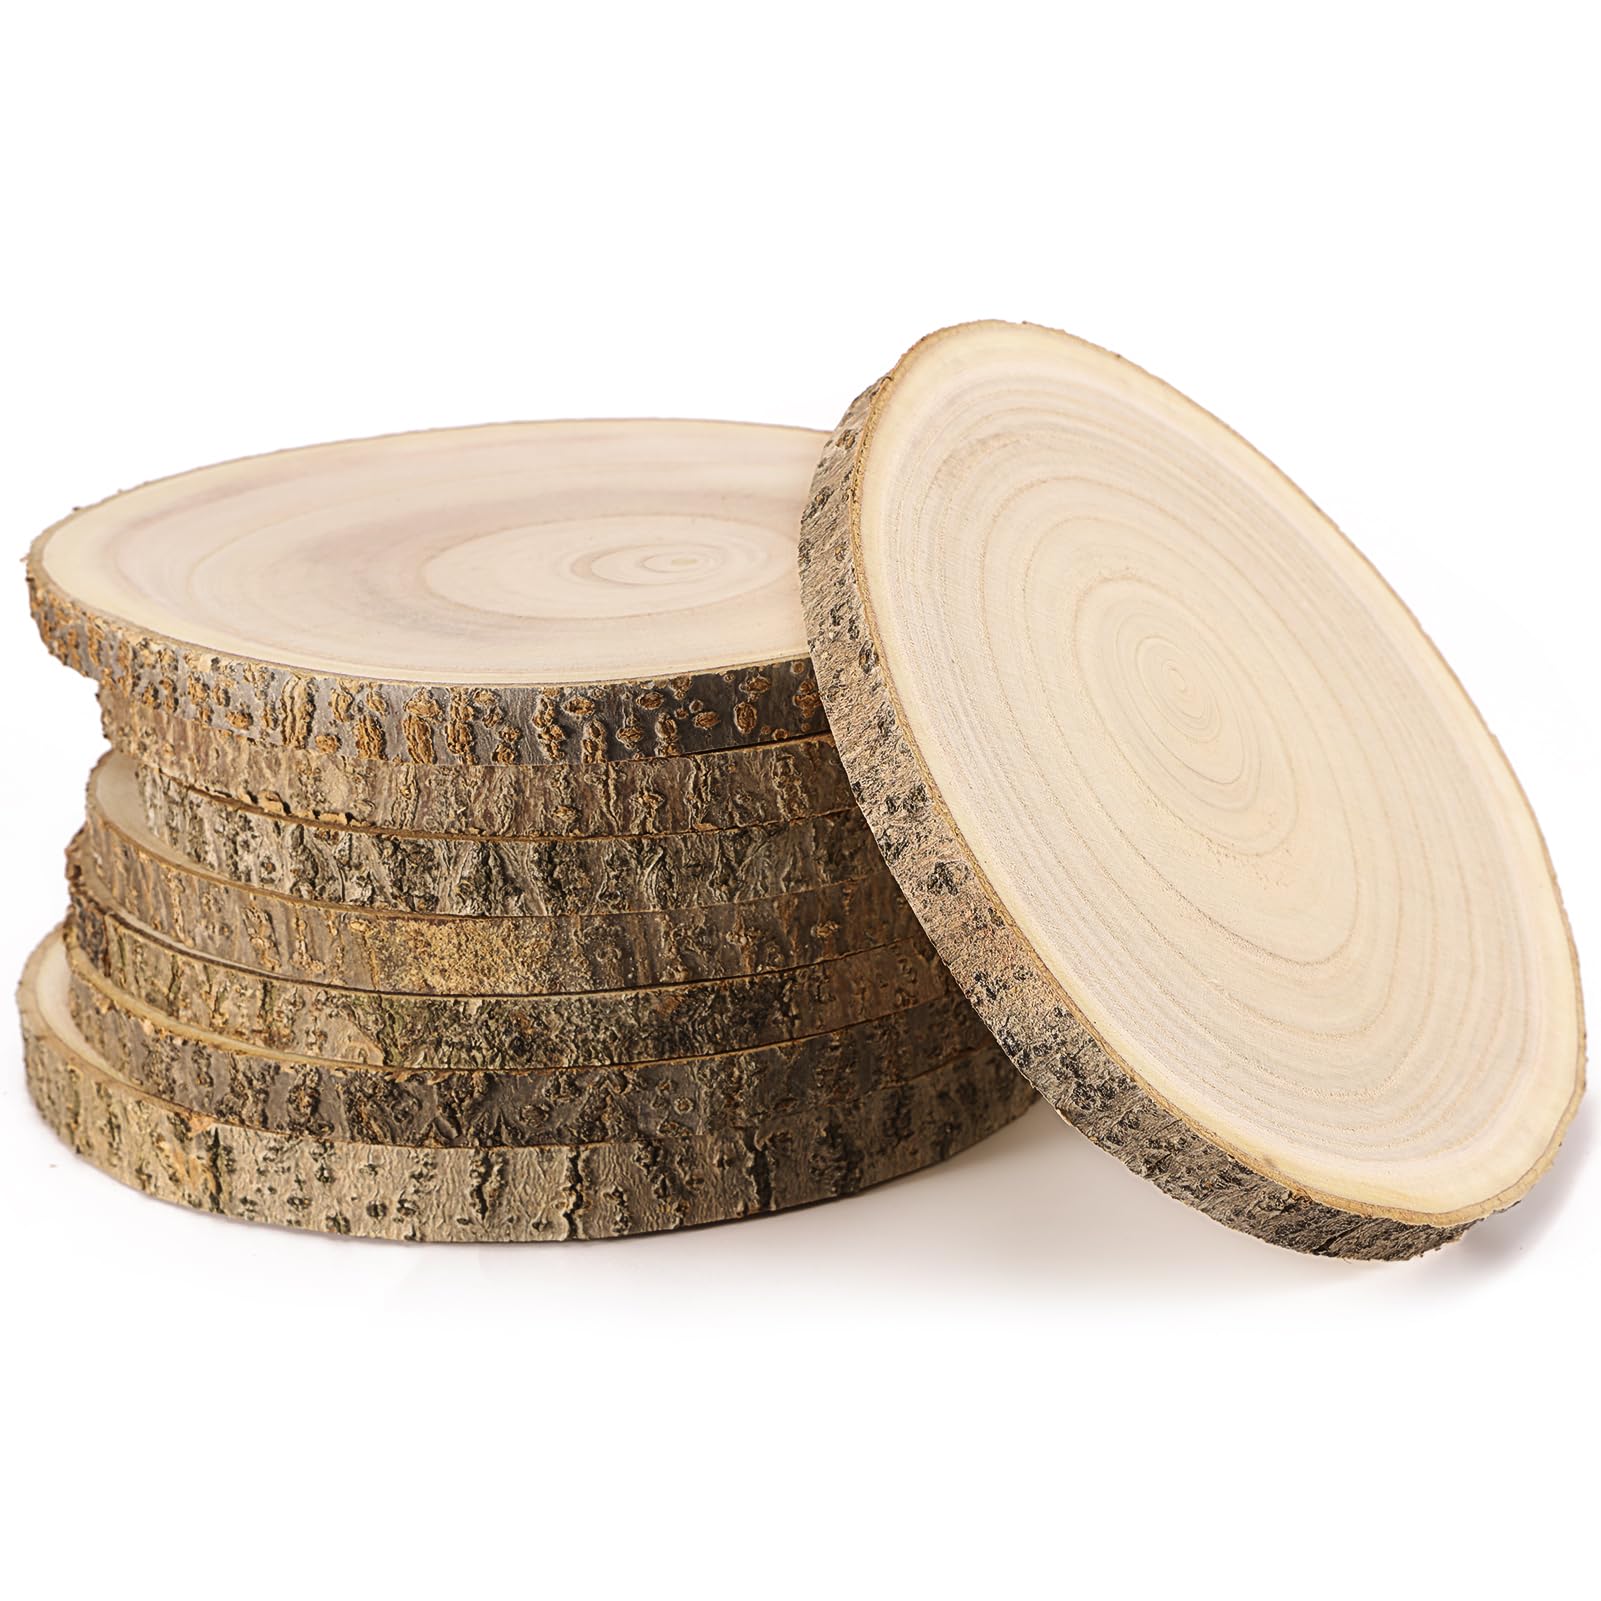 Pllieay 10Pcs 5.5-6 Inch Wood Slices, Unfinished Natural Craft Wooden  Circles Tree Slice for DIY Crafts Wedding Decorations Holidays Ornaments  Arts